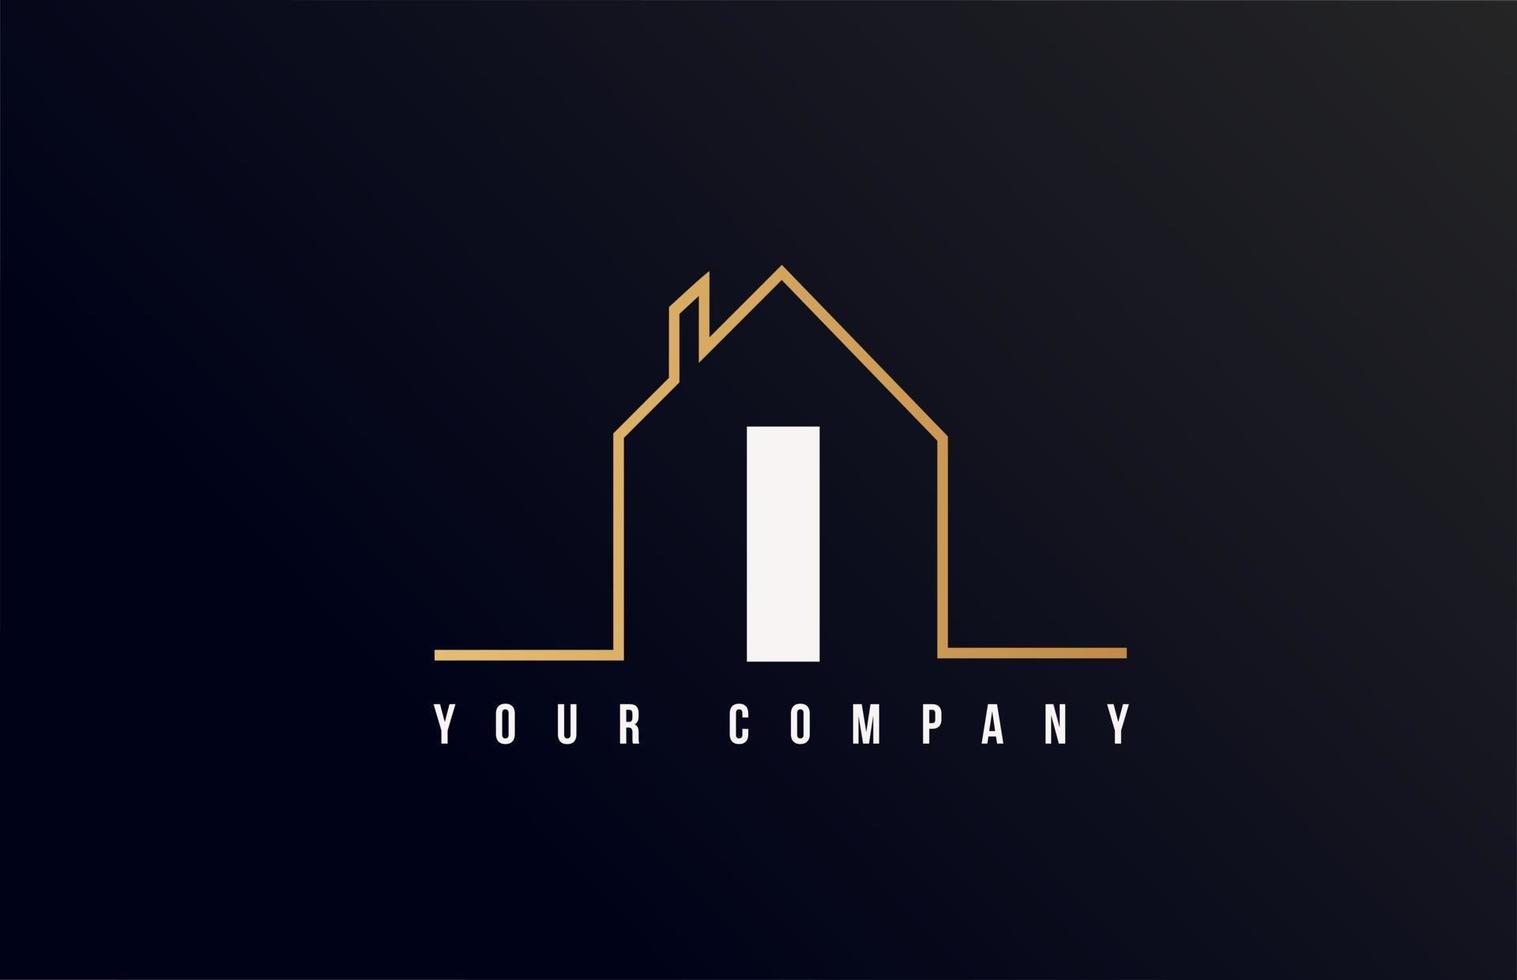 I house alphabet letter icon logo design. House real estate for company and business identity with line contour of a home vector